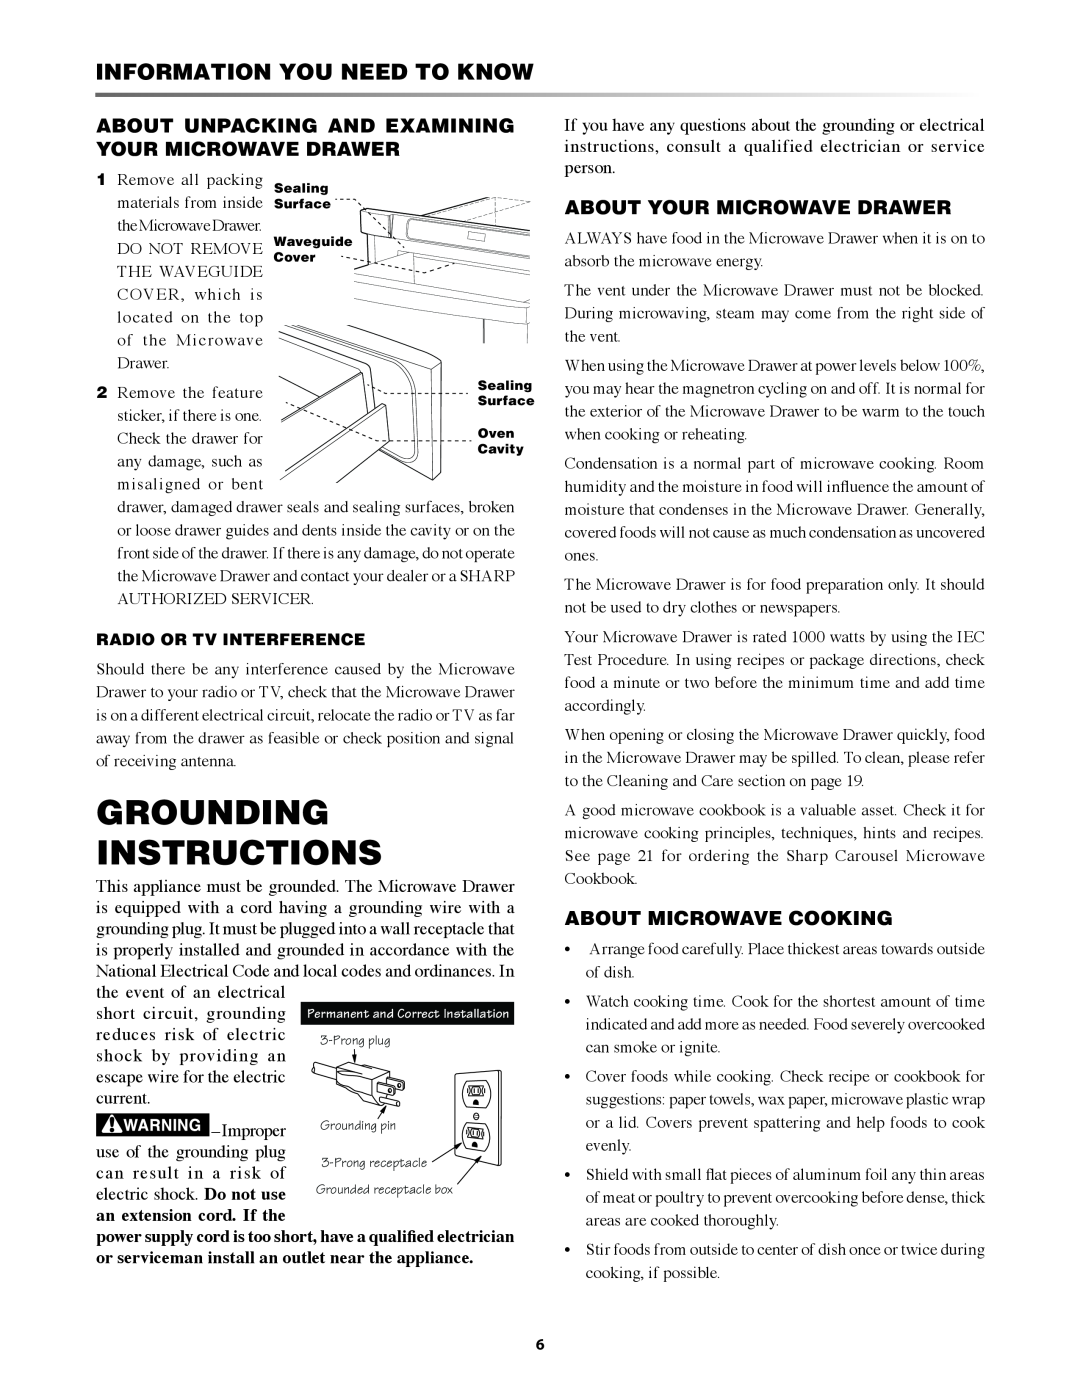 Sharp KB6525PKRB operation manual Grounding Instructions, Information You Need To know, ABOUT your Microwave Drawer 